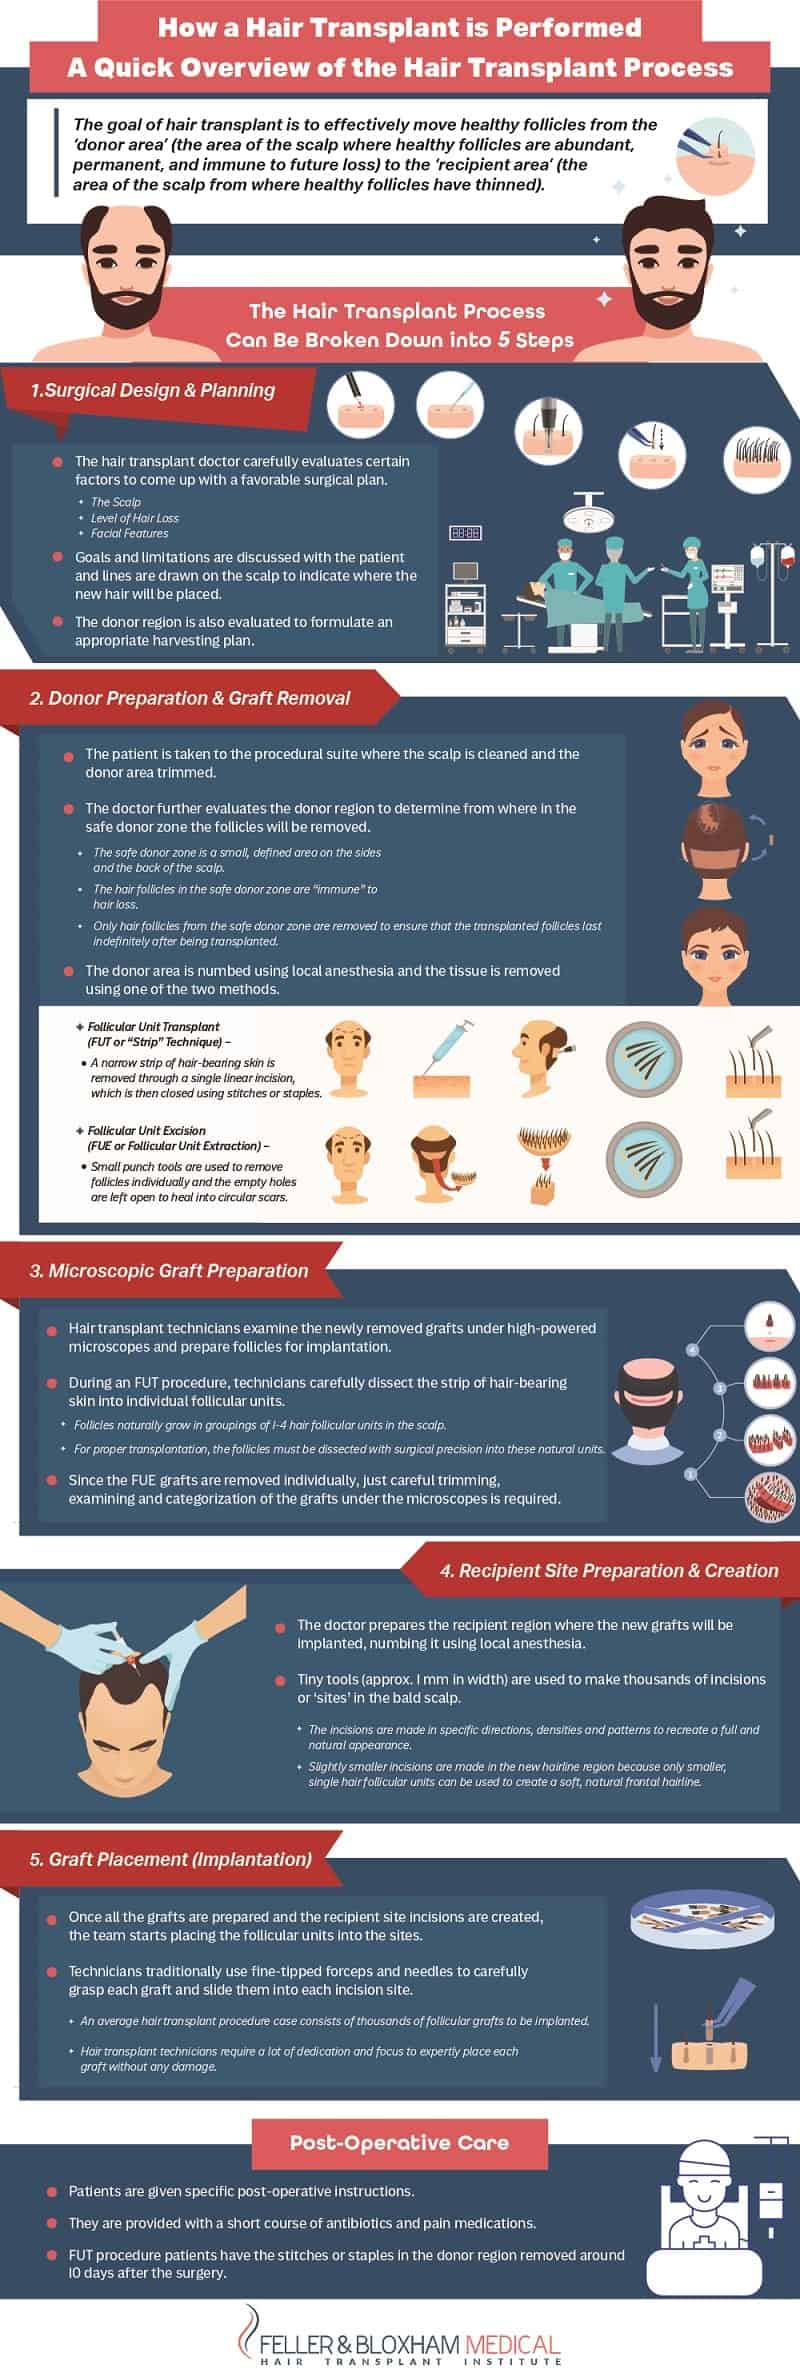 A Quick Overview of the Hair Transplant Process